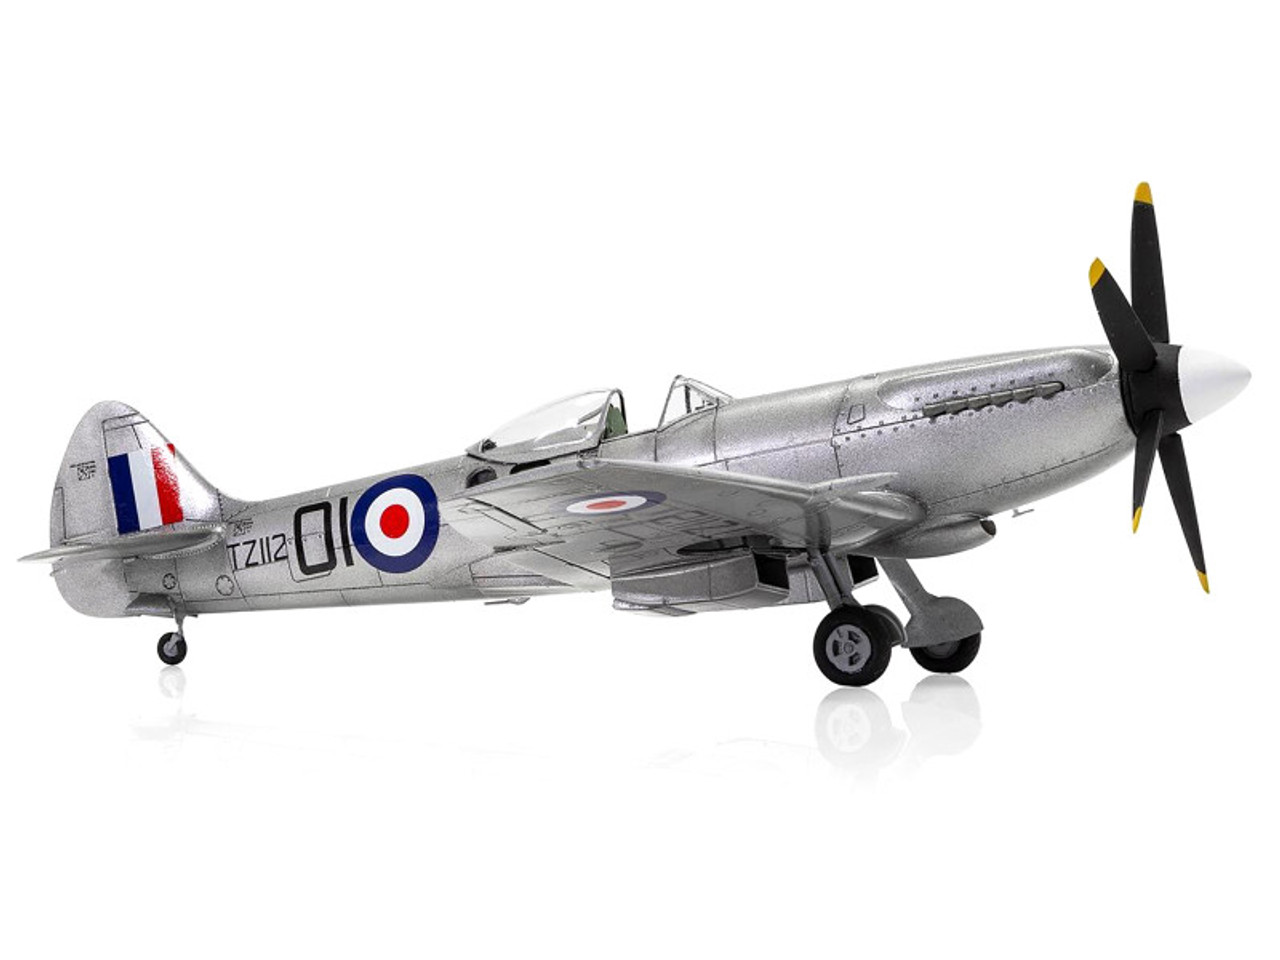 Skill 2 Model Kit Supermarine Spitfire FR Mk.XIV Fighter Aircraft with 2 Scheme Options 1/48 Plastic Model Kit by Airfix